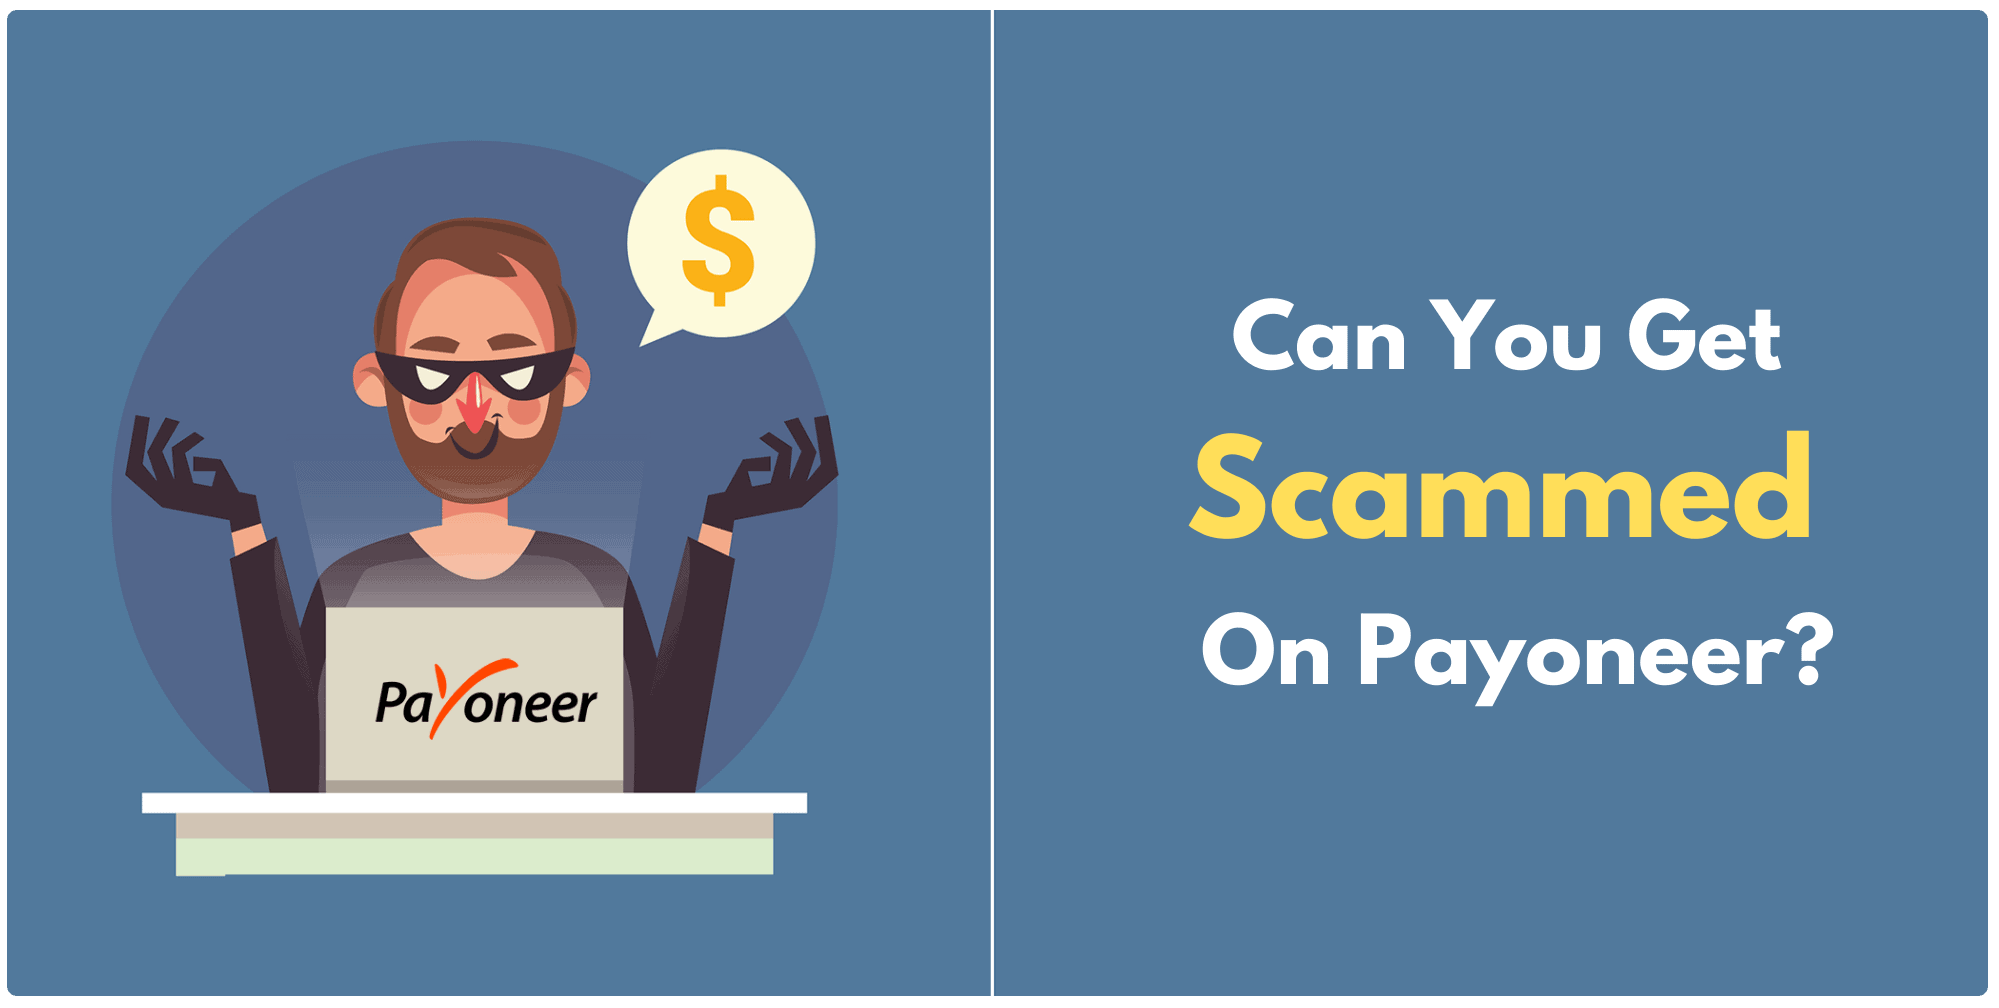 Can You Get Scammed on Payoneer